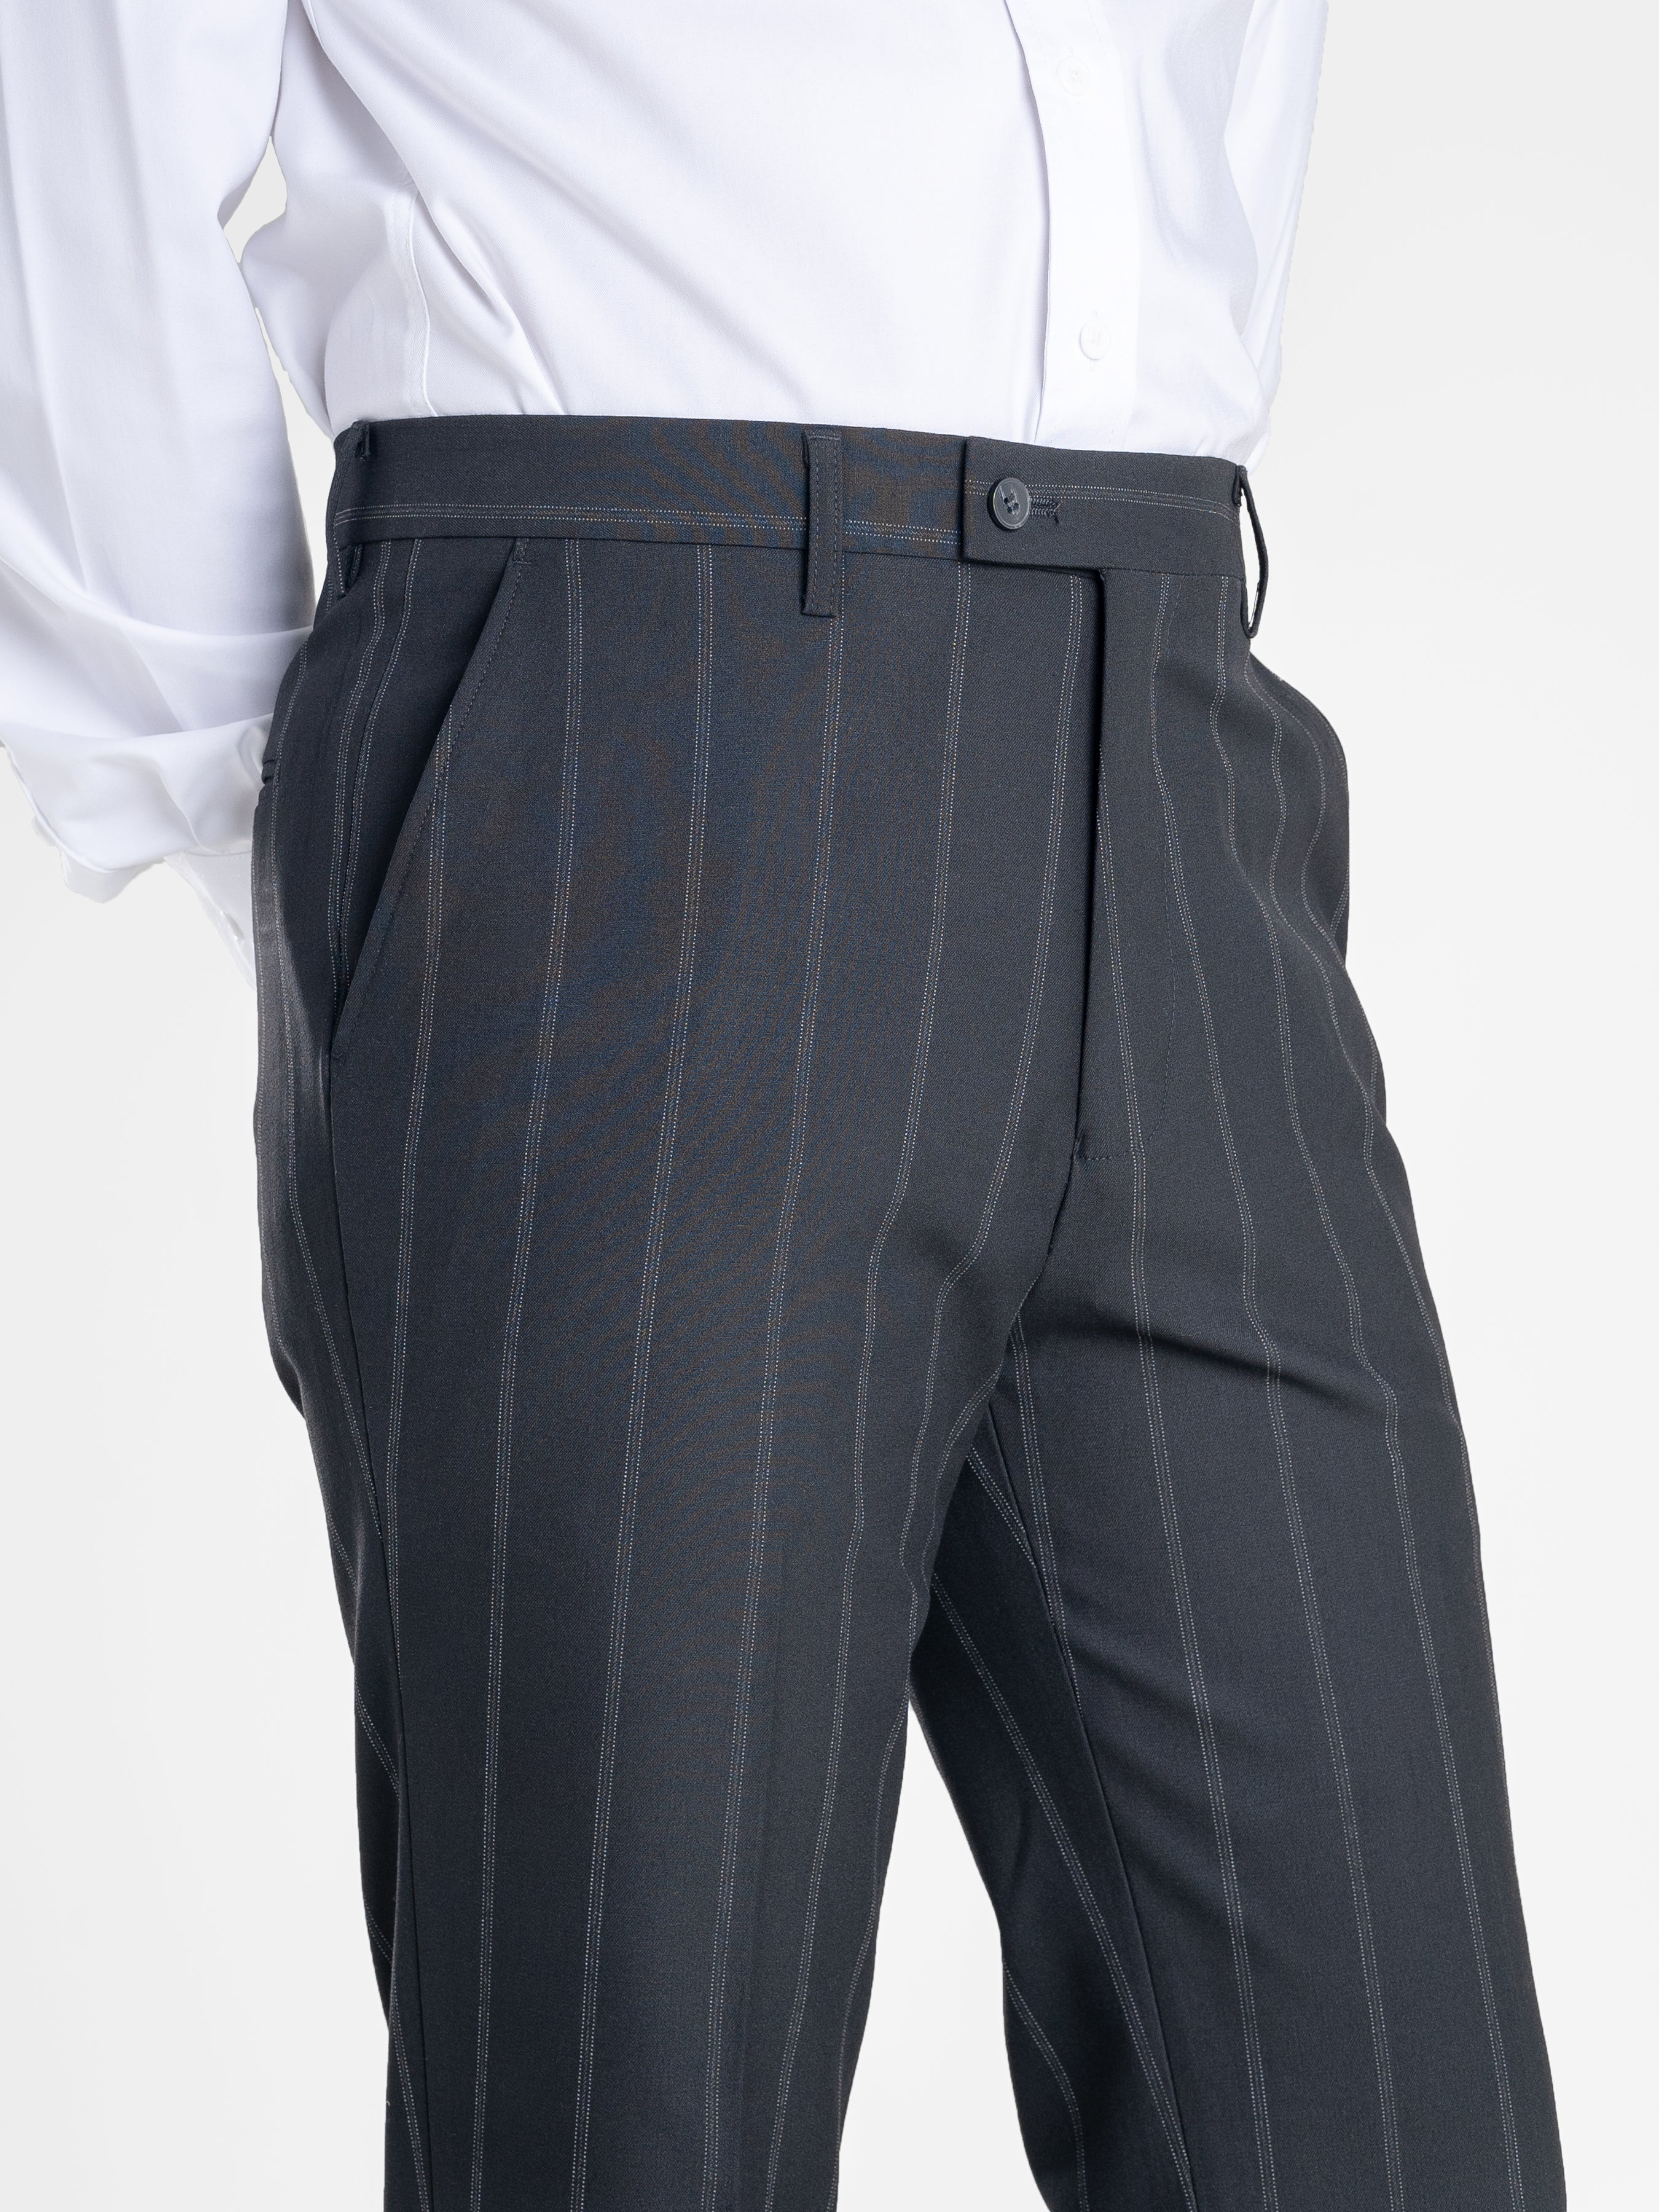 Trousers With Belt Loop -  Black Wide Stripes (Stretchable)